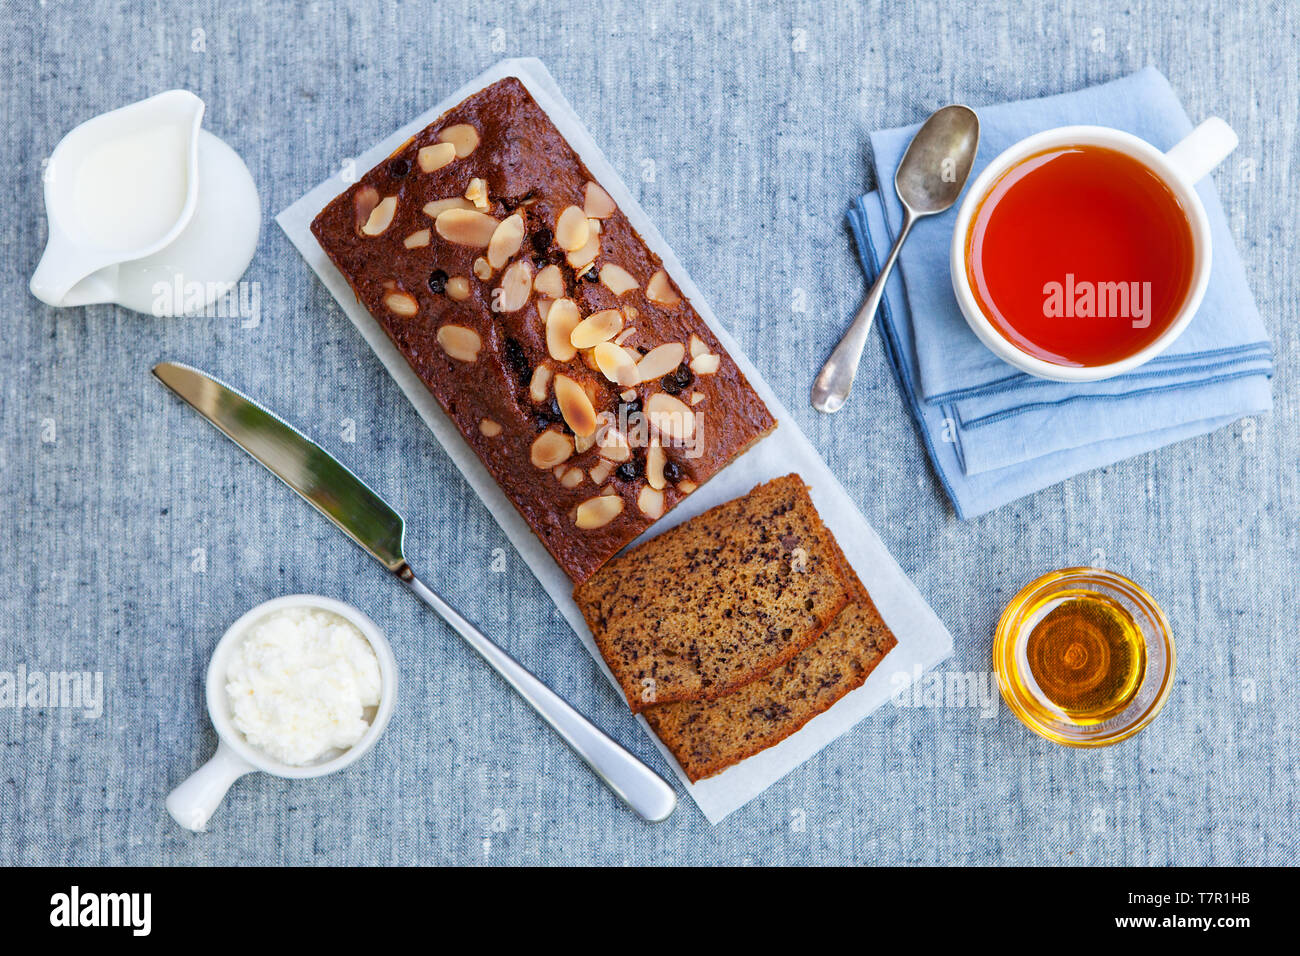 Banana, carrot, apple cake, loaf with chocolate and cup of tea on grey textile background. Top view. Stock Photo